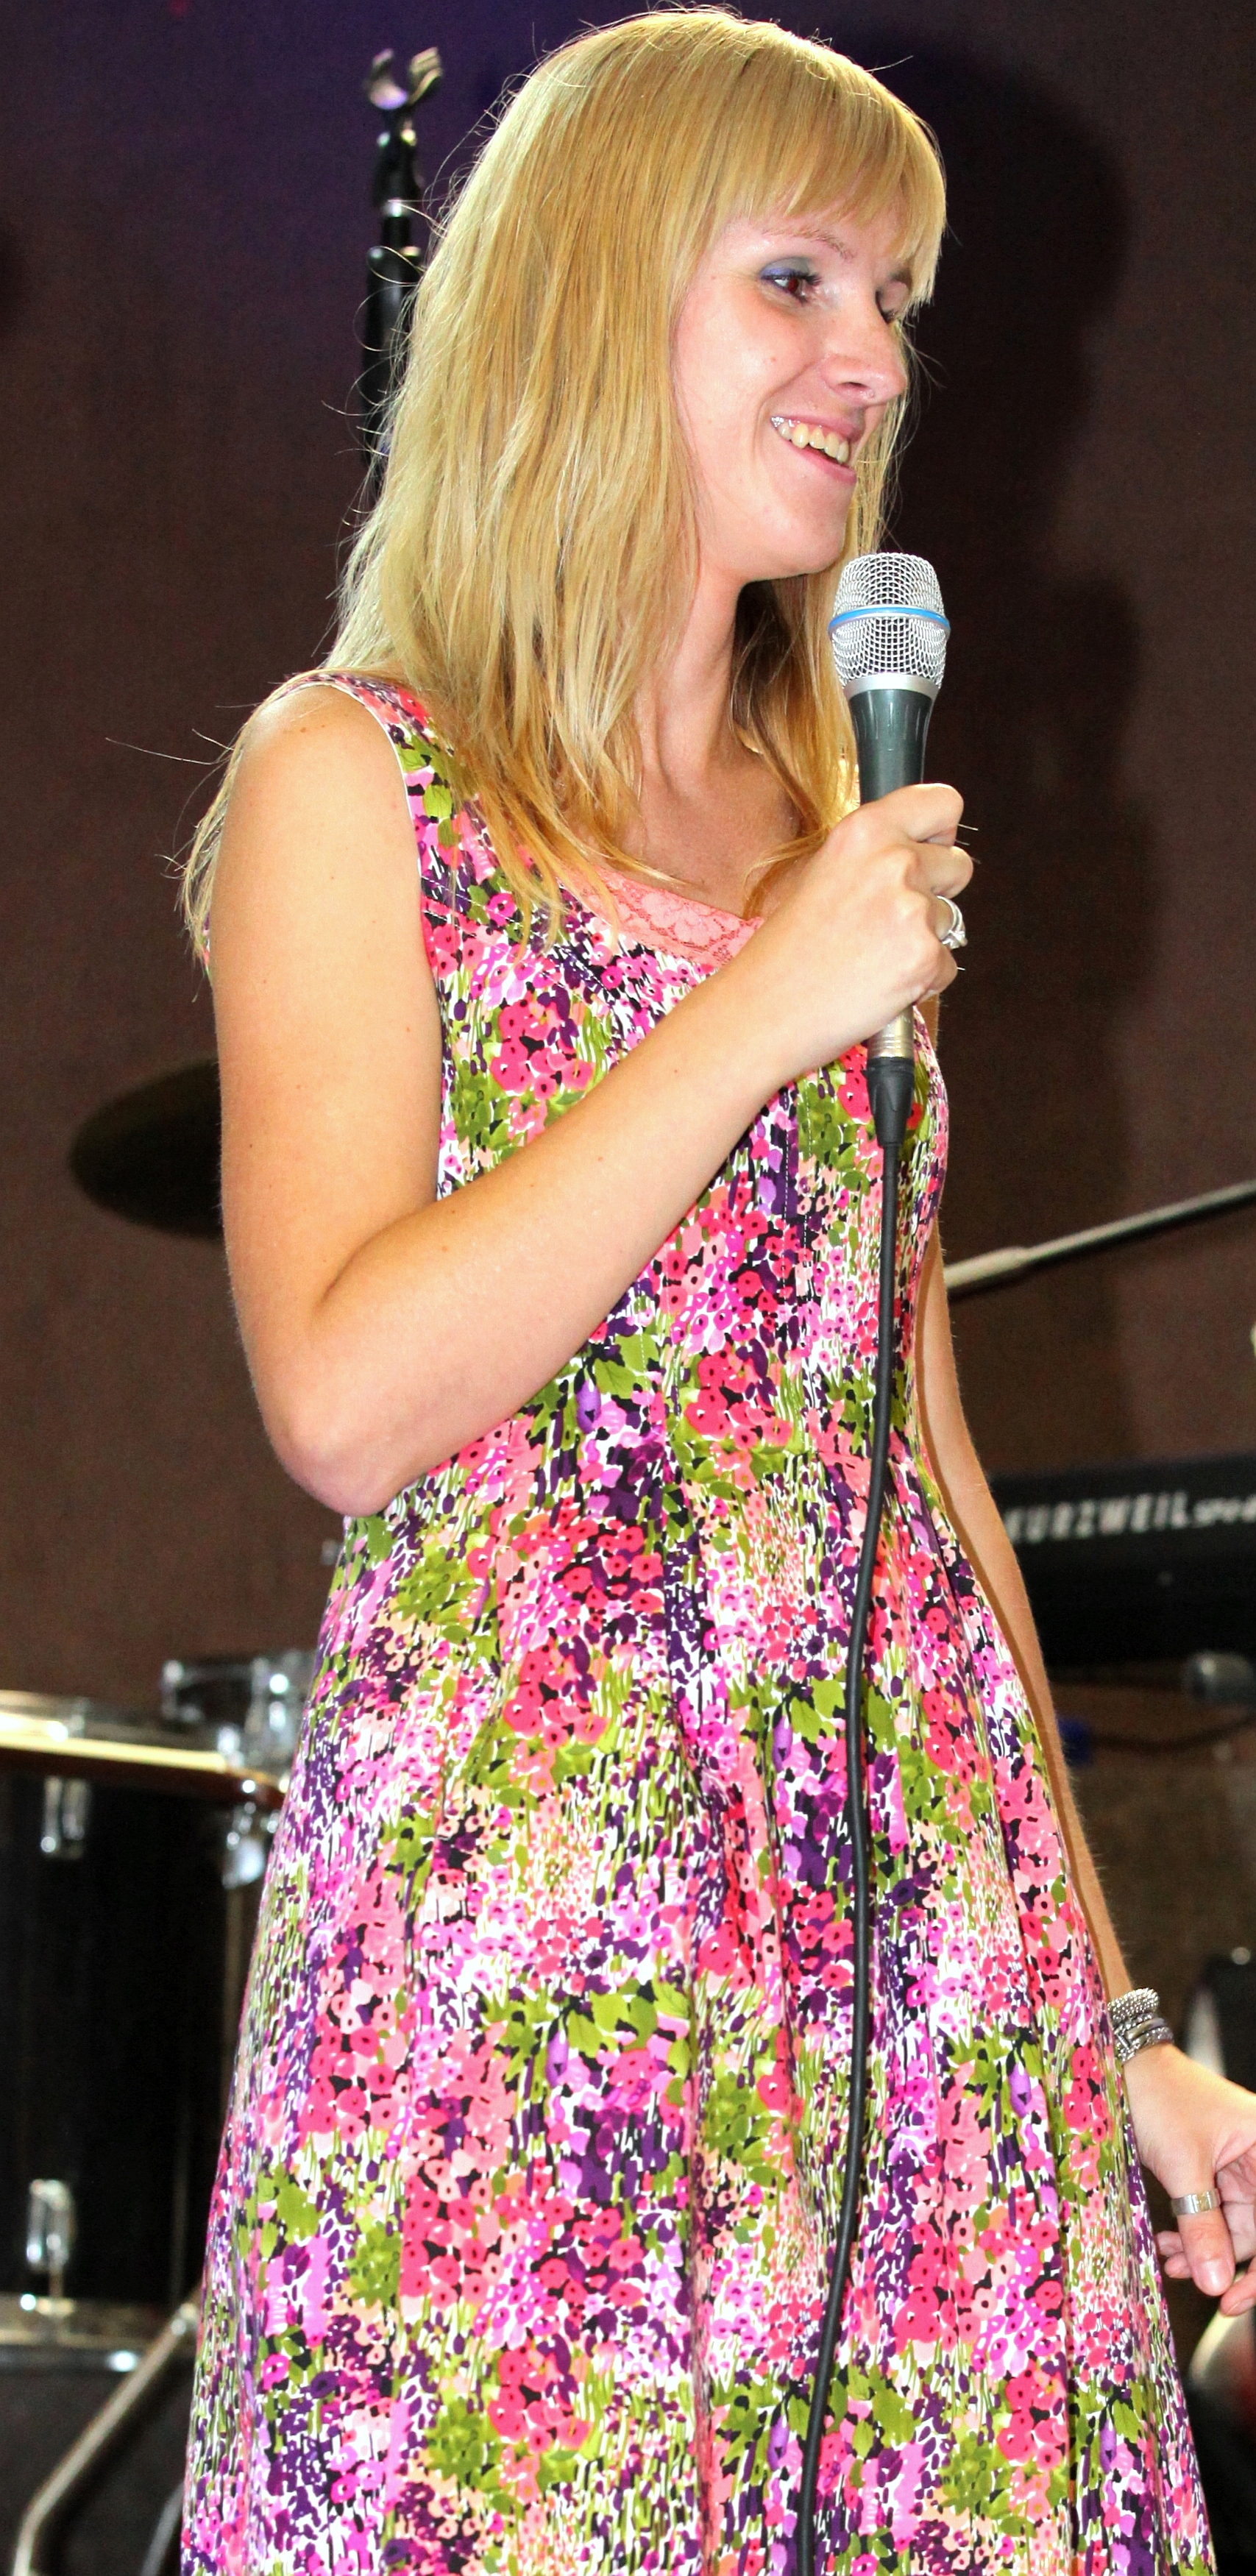 a blond girl in a colorful dress holding a microphone at a protestant gathering in July 2013, image 4/7